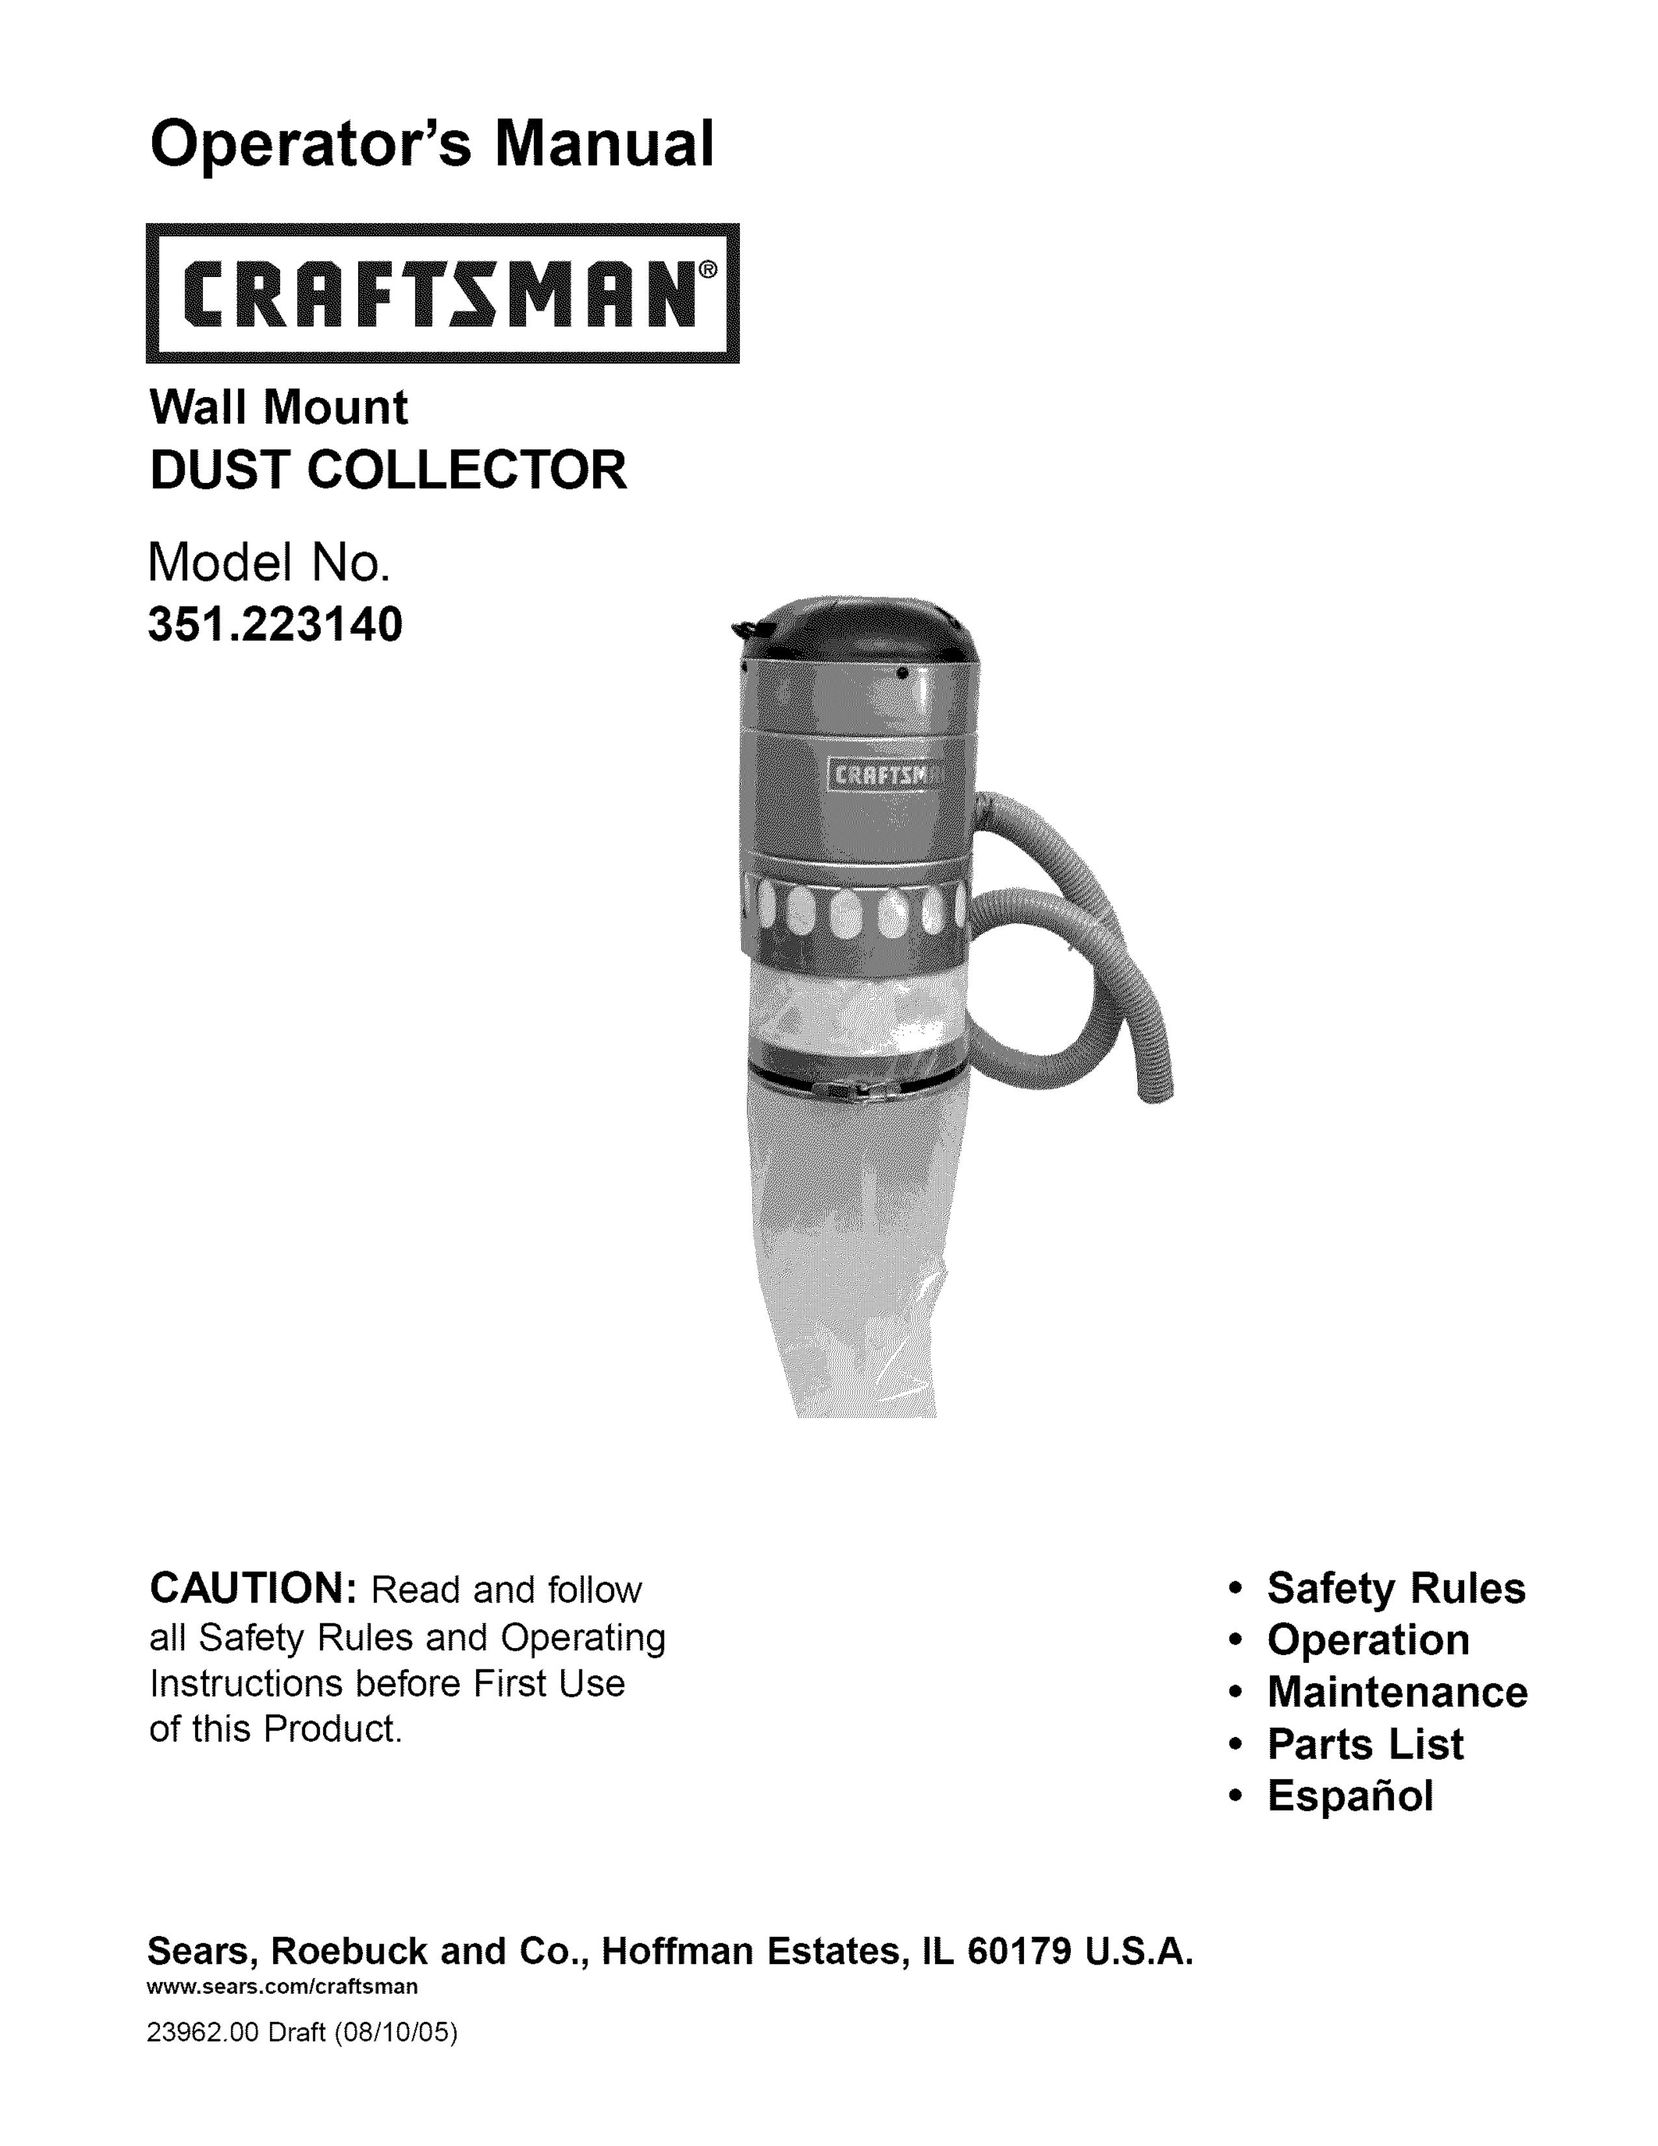 Craftsman 351.223140 Dust Collector User Manual